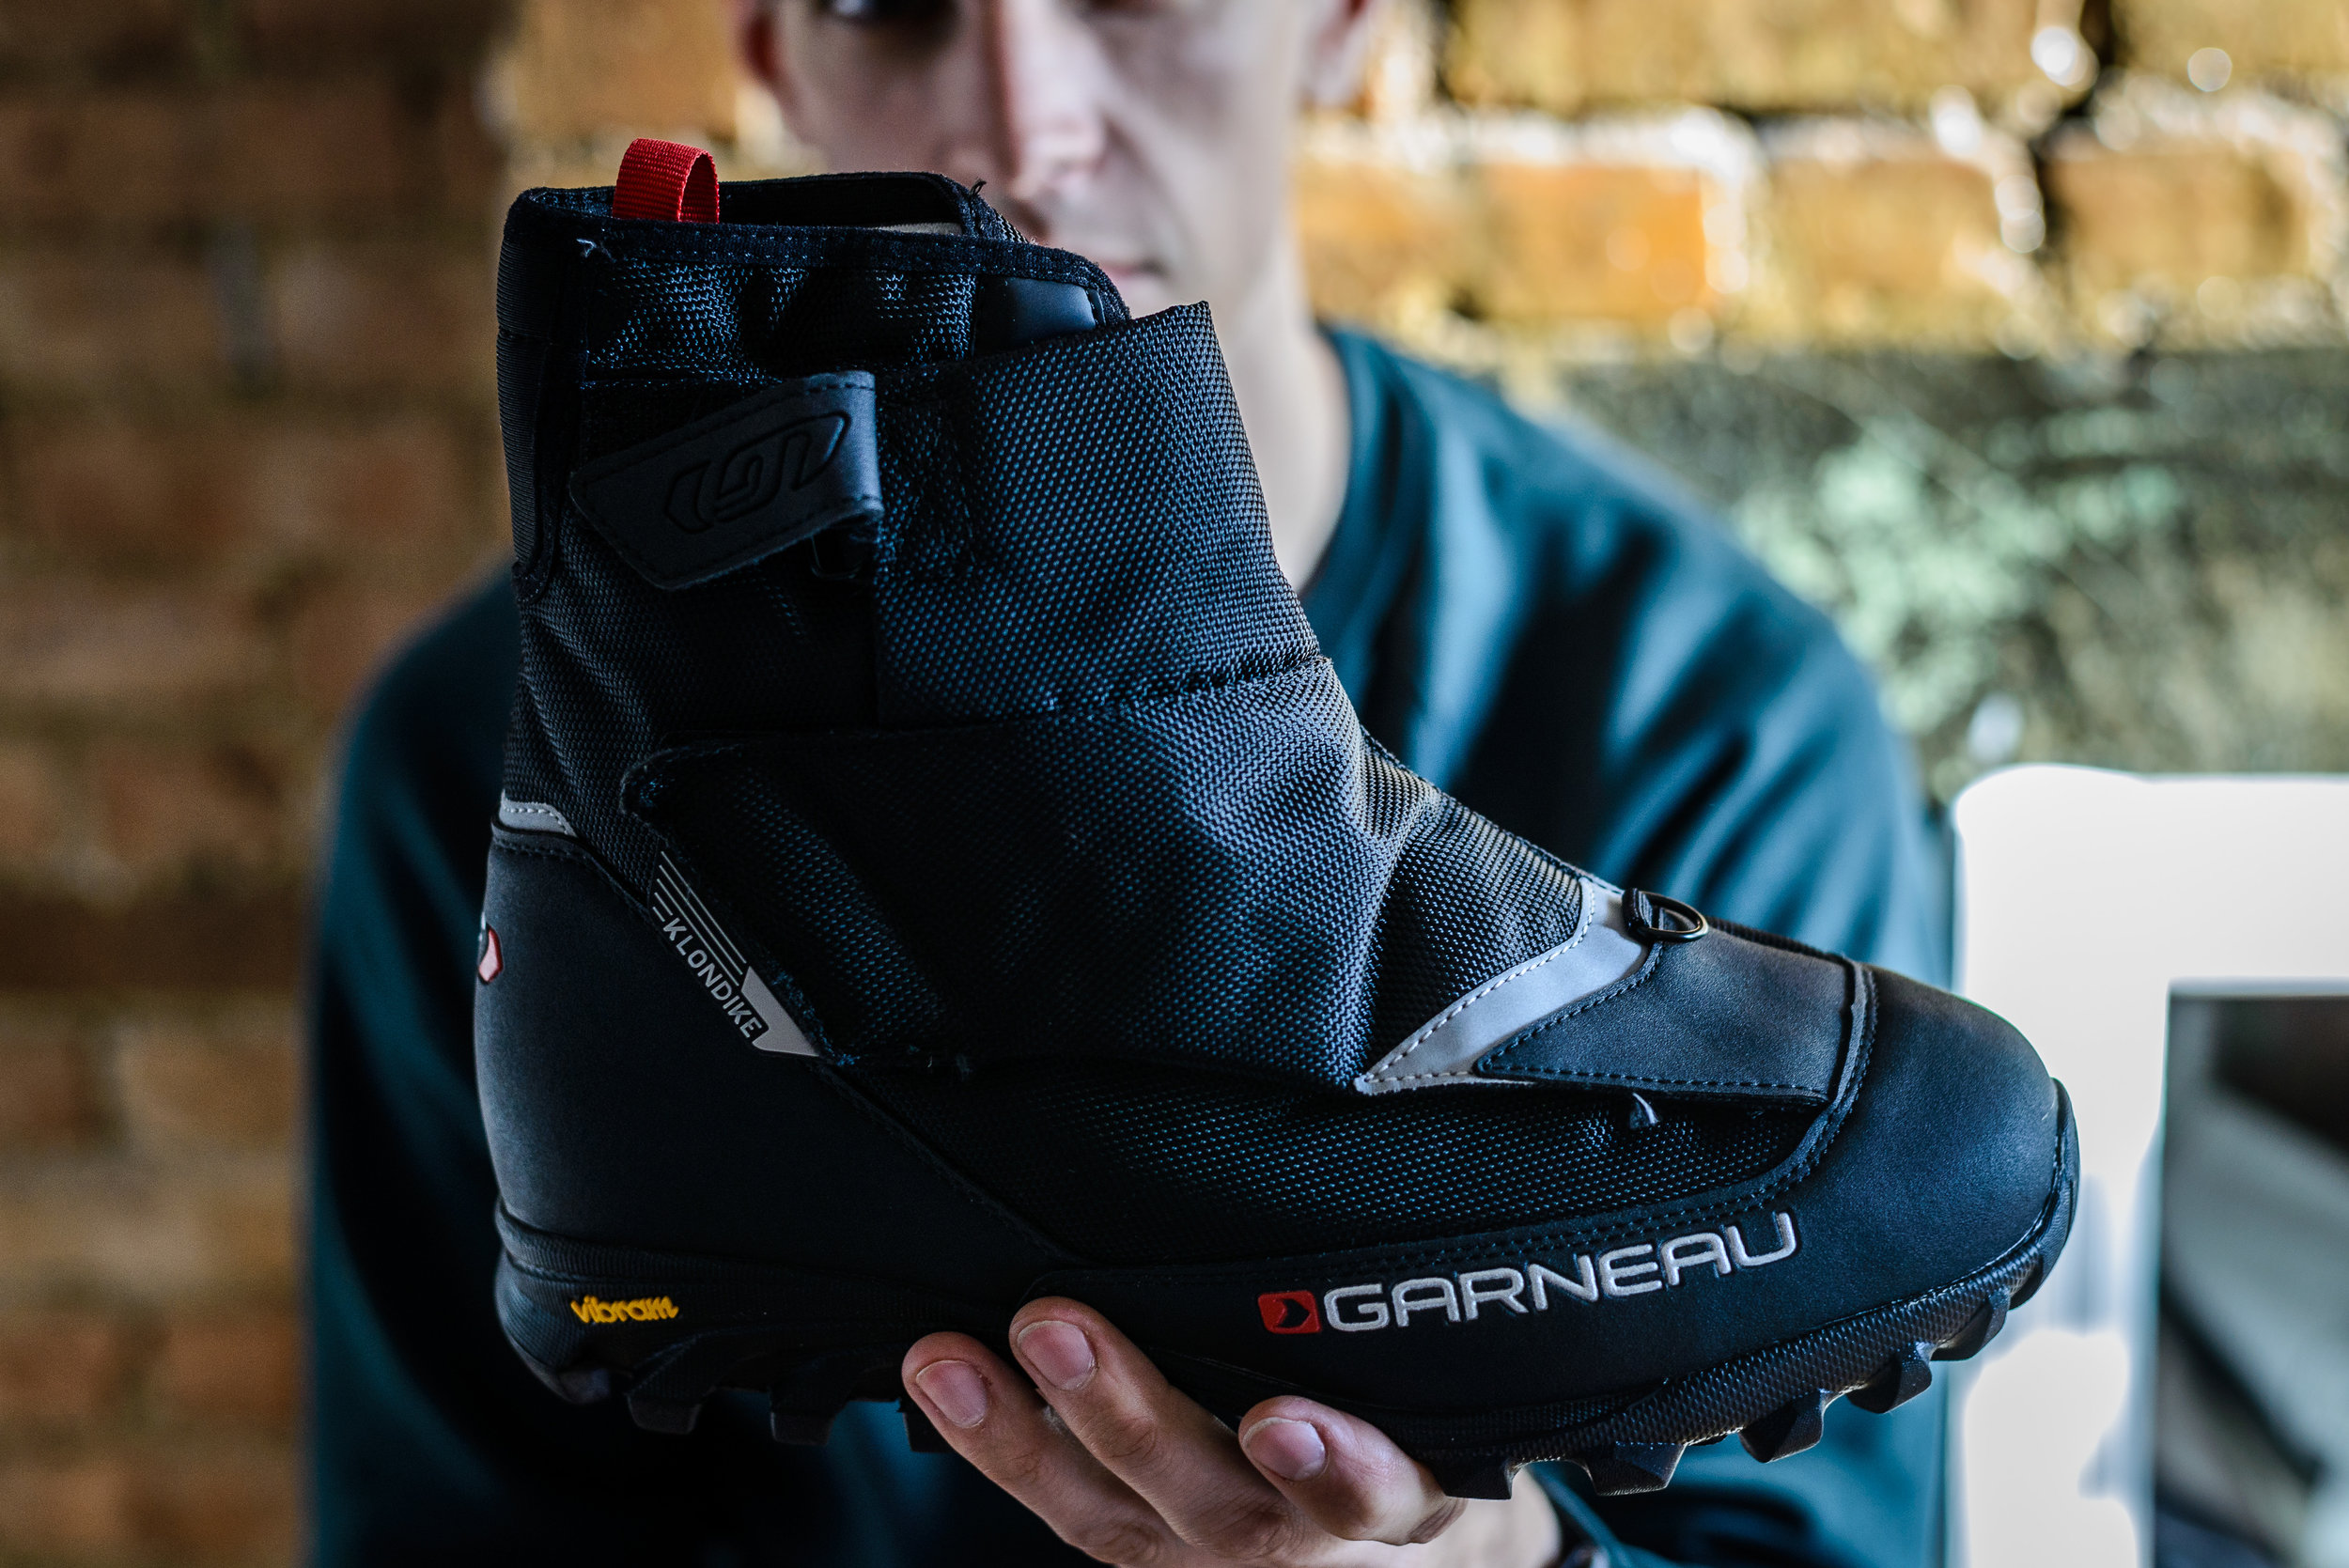 Winter Shoes Review: Garneau Klondike and Mudstone — To Be